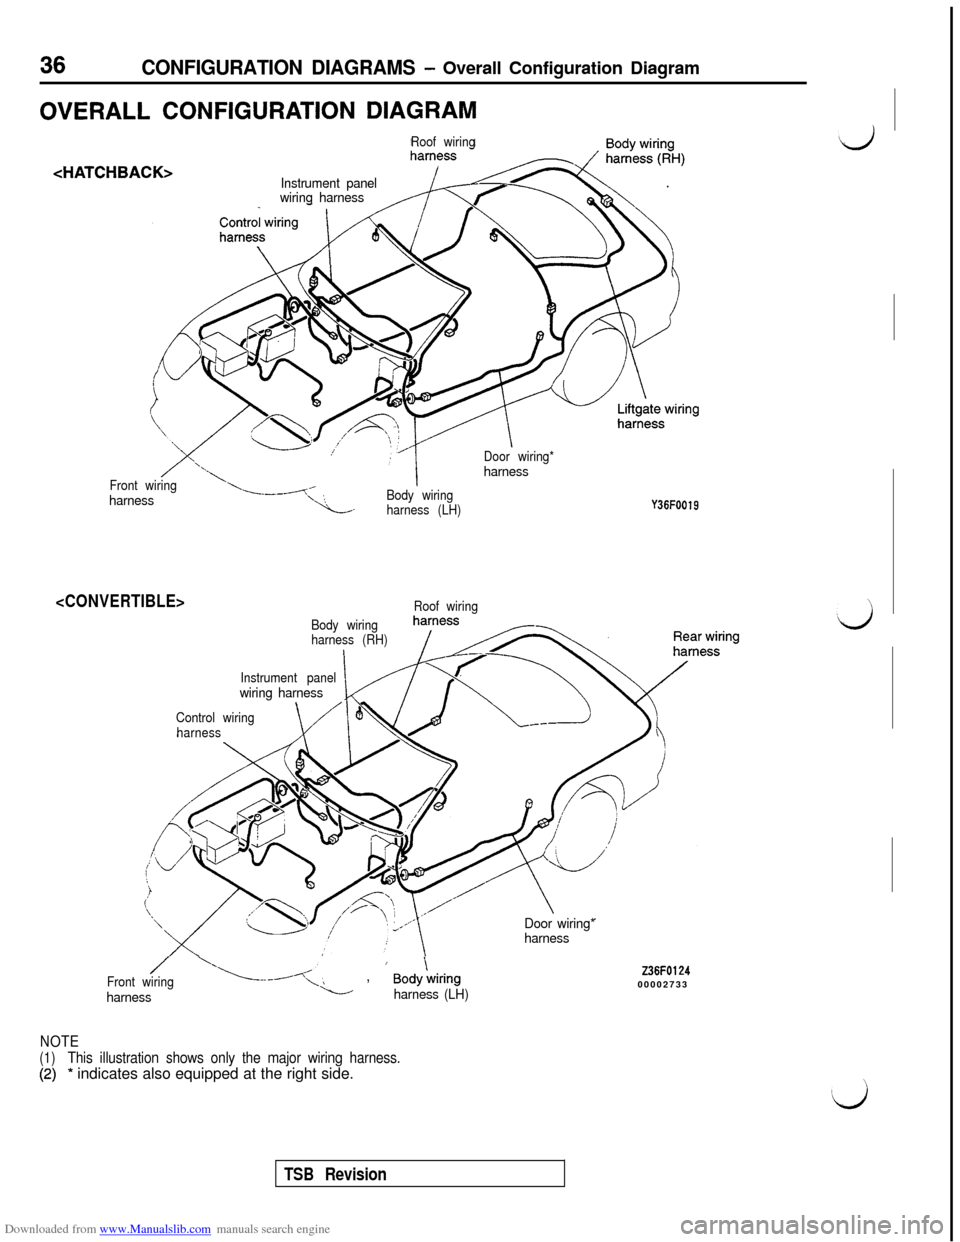 MITSUBISHI 3000GT 1993 2.G Owners Guide Downloaded from www.Manualslib.com manuals search engine 36CONFIGURATION DIAGRAMS - Overall Configuration Diagram
OVERALL CONFIGURATION DIAGRAM
<HAT1
Roof wiring
CHBACK>Instrument panel
wiring harness